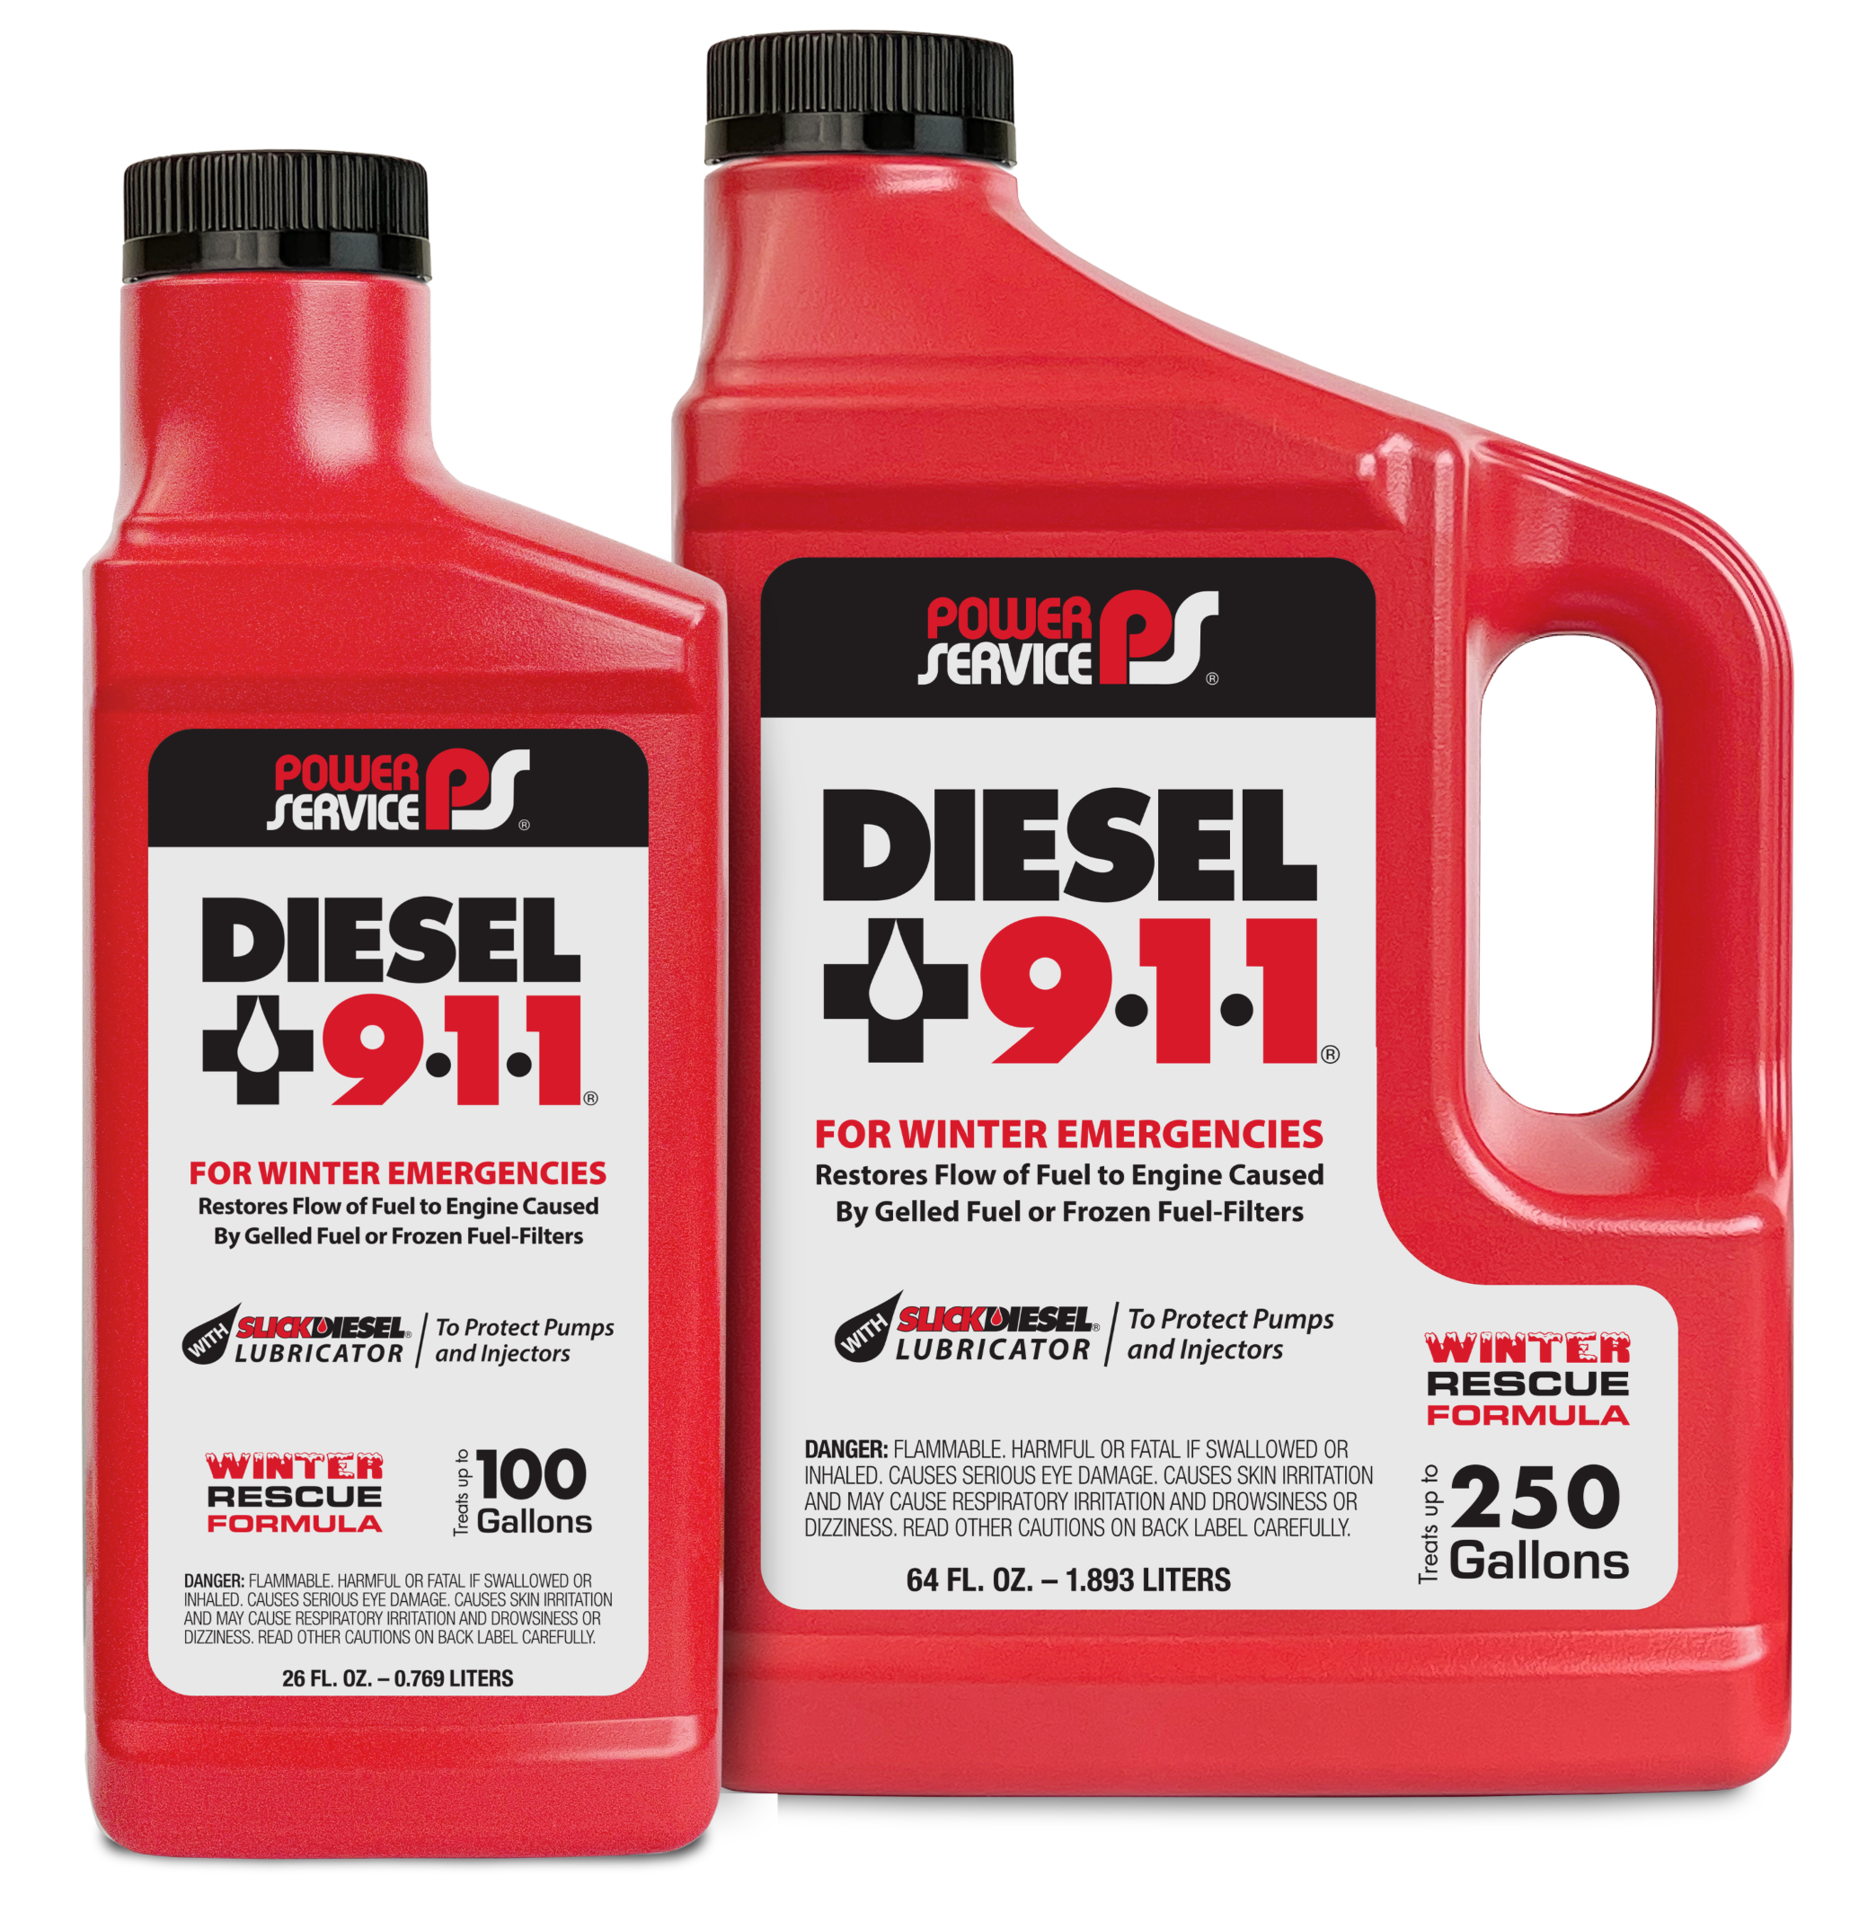 Winter Diesel Facts & How To Fight Fuel Gelling –